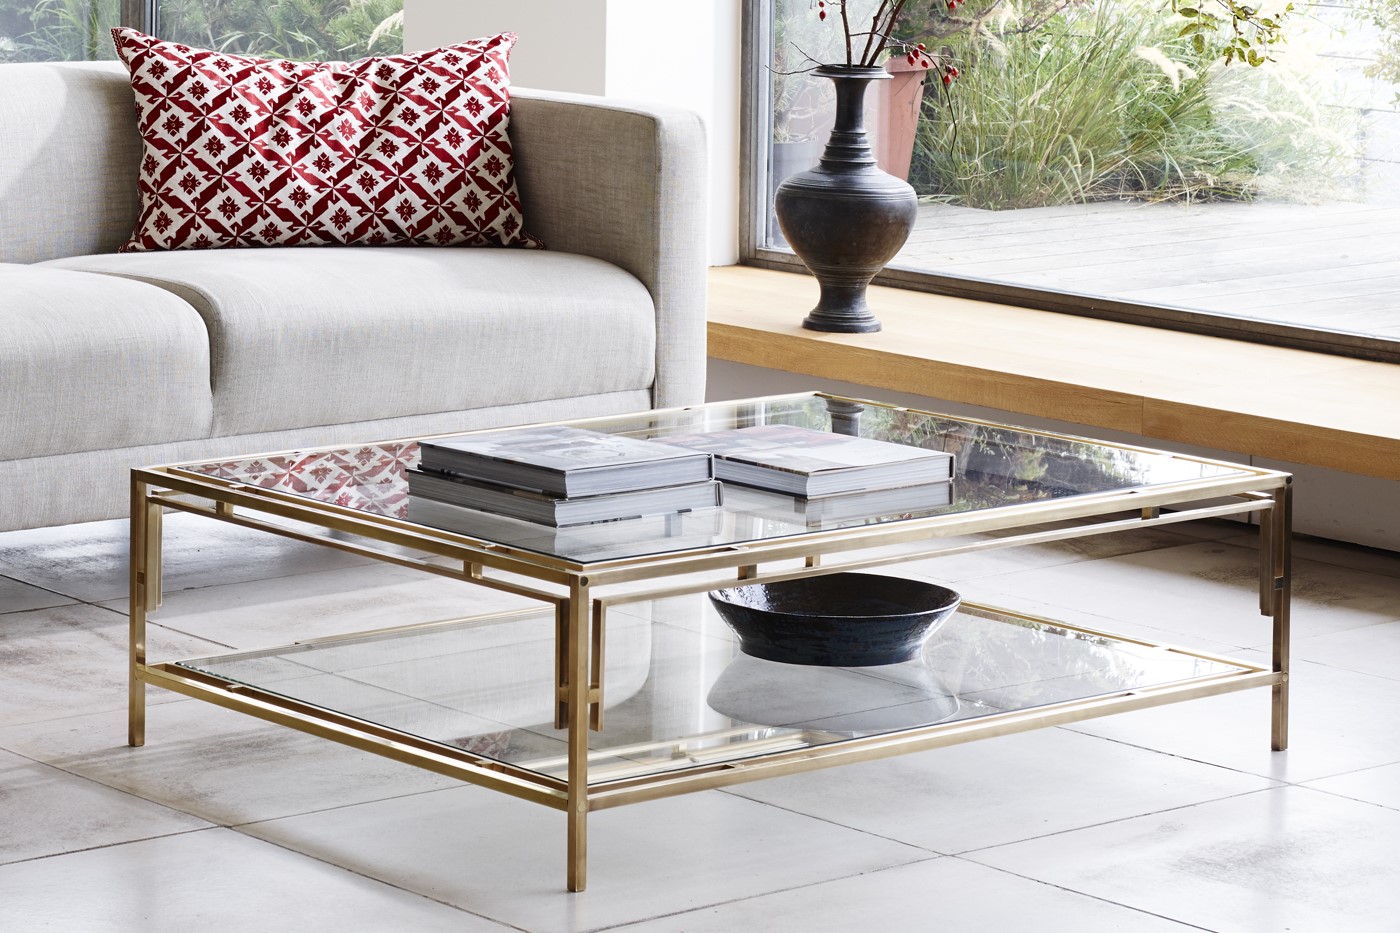 glass topped coffee table with books on it in front of cream couch with a rust patterned cushion